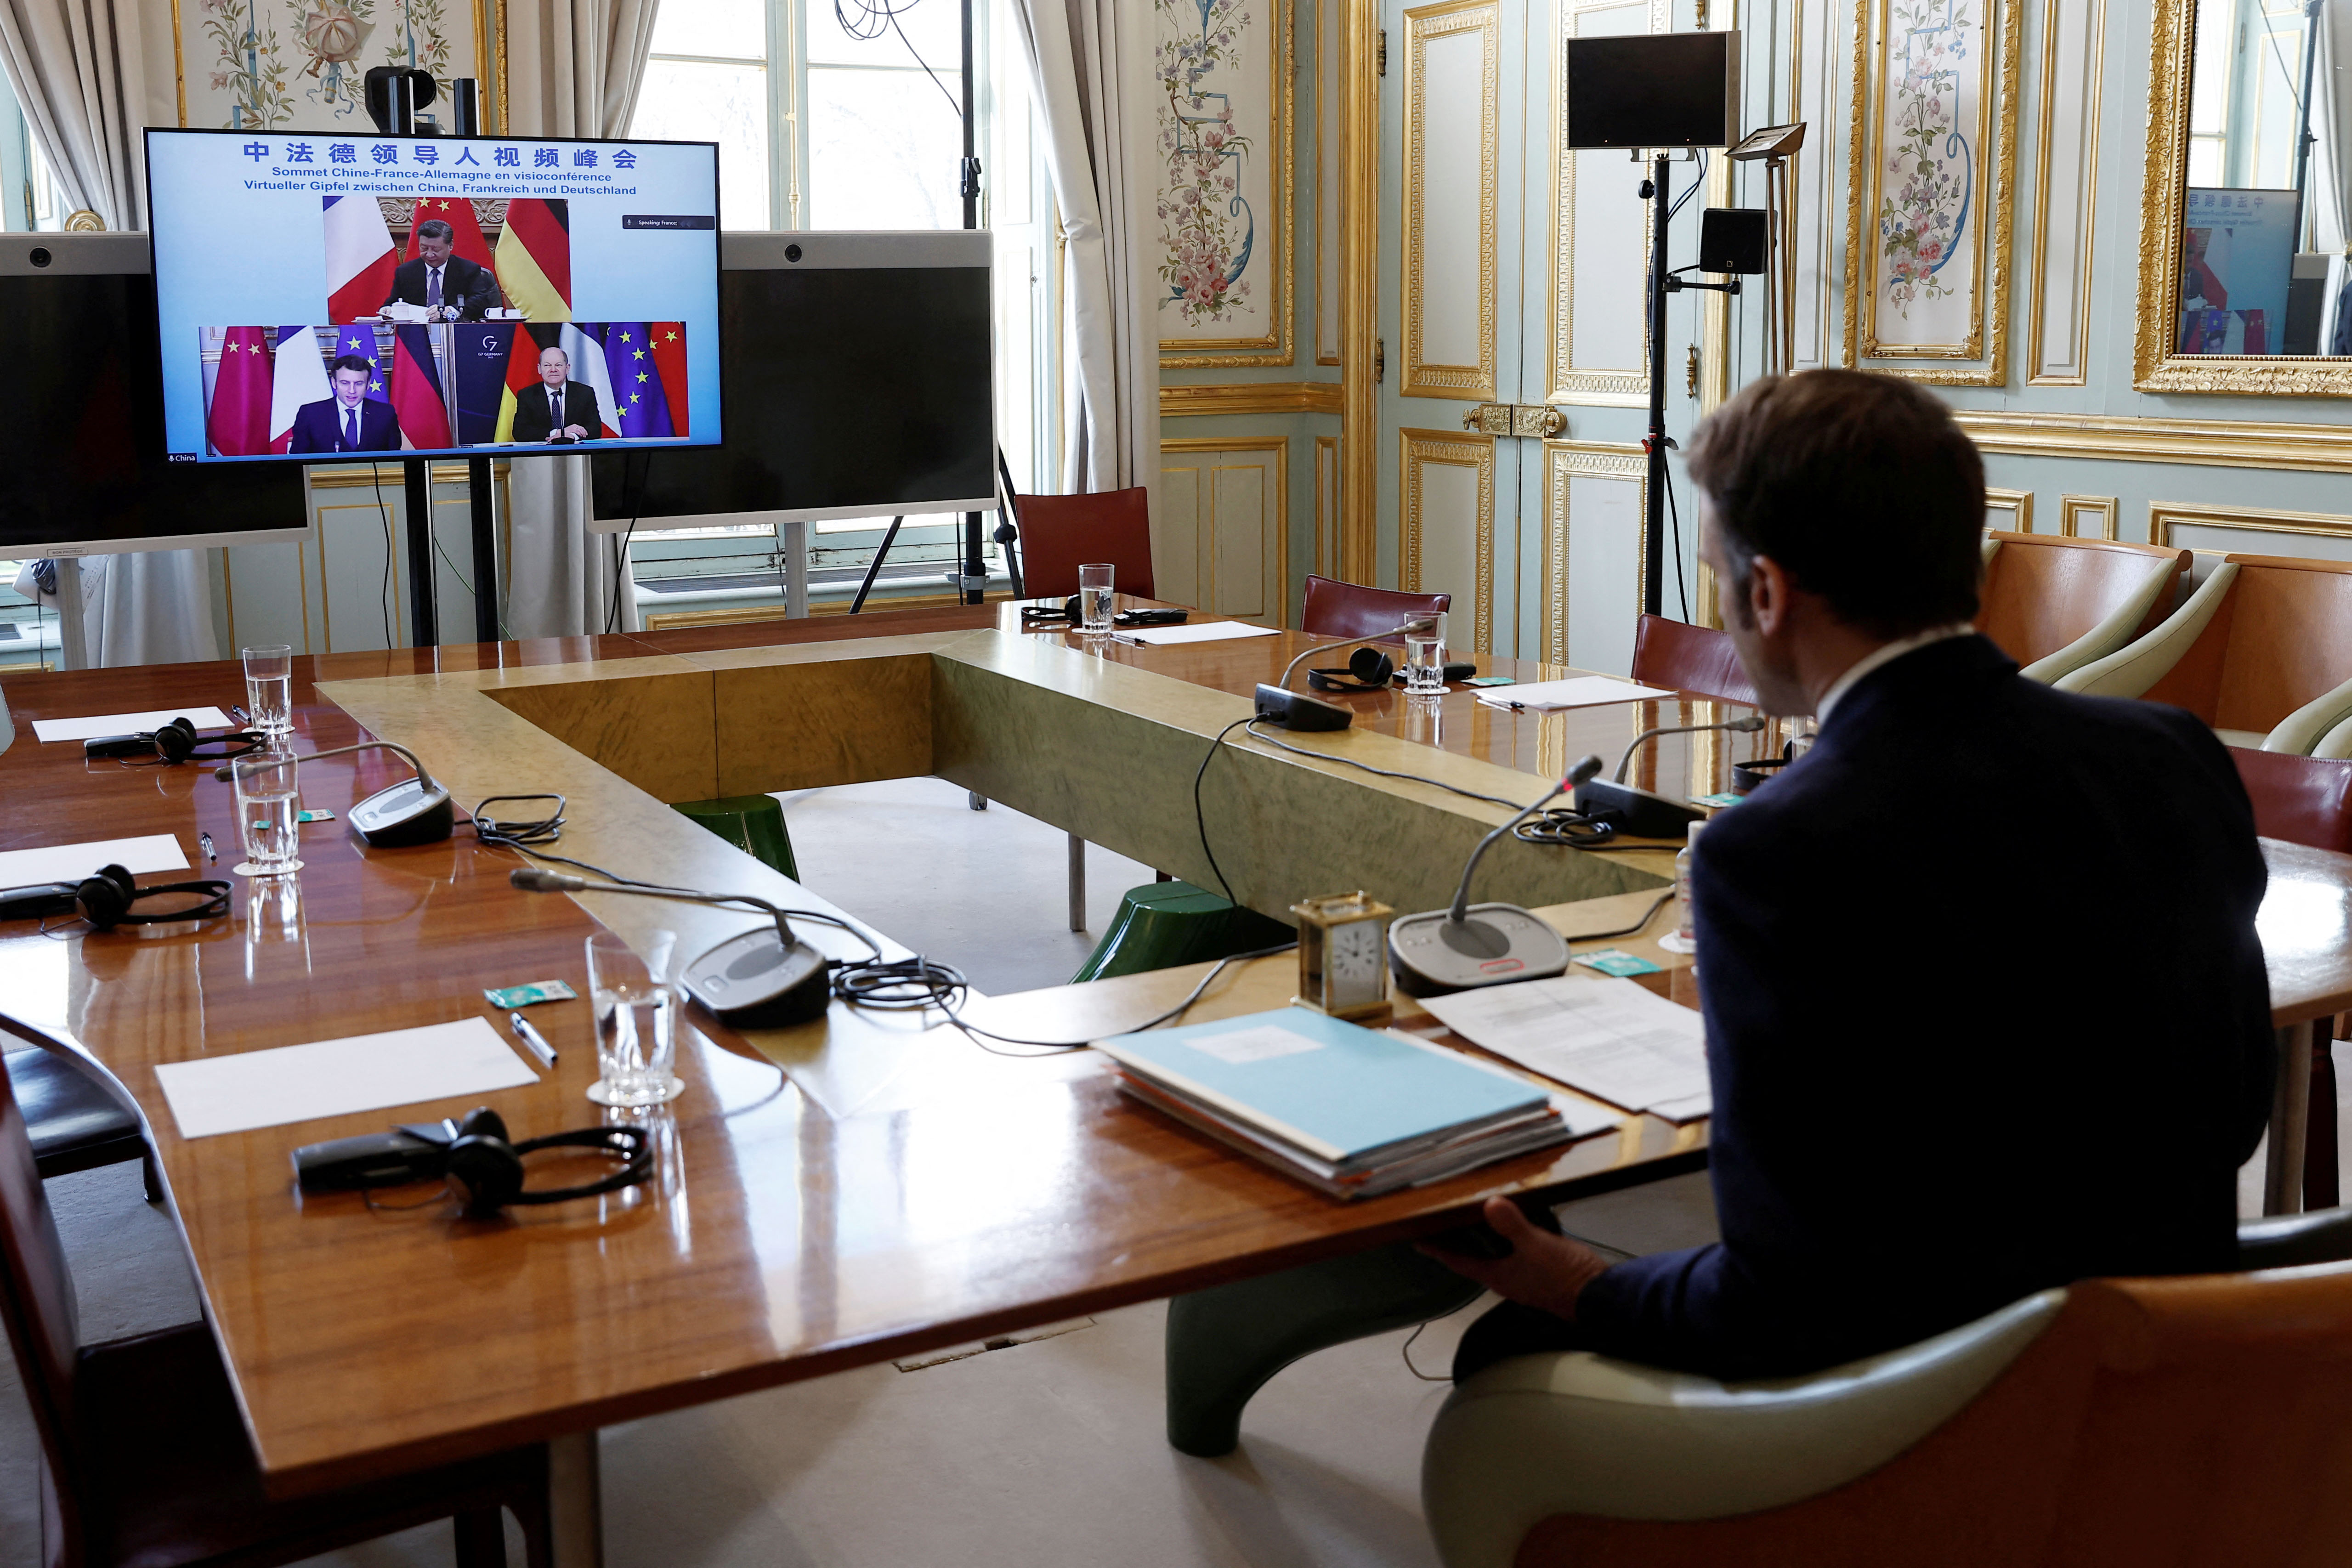 French President Emmanuel Macron attends a video-conference with German Chancellor Olaf Scholz and Chinese President Xi Jinping to discuss the Ukraine crisis, at the Elysee Palace, Paris, France, on March 8.